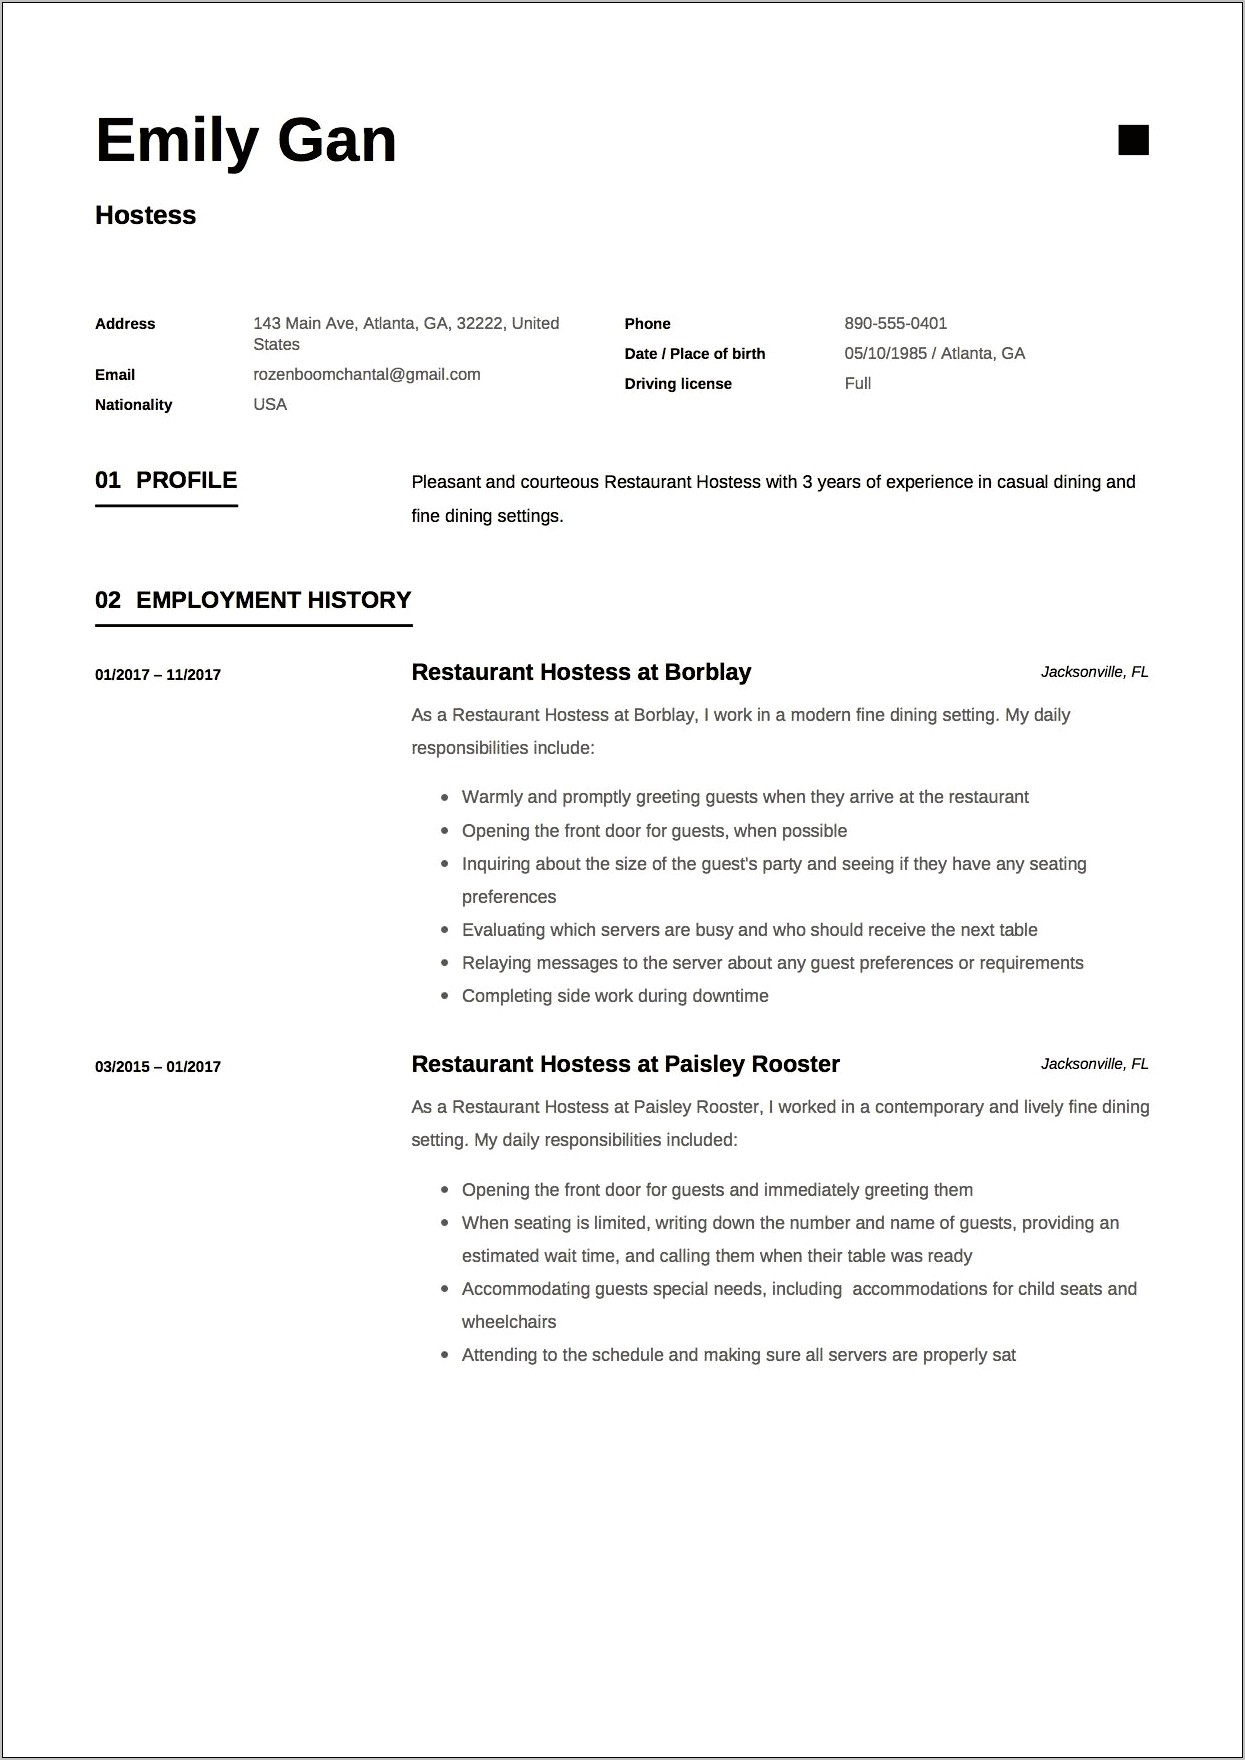 Resume For Hostess With No Experience